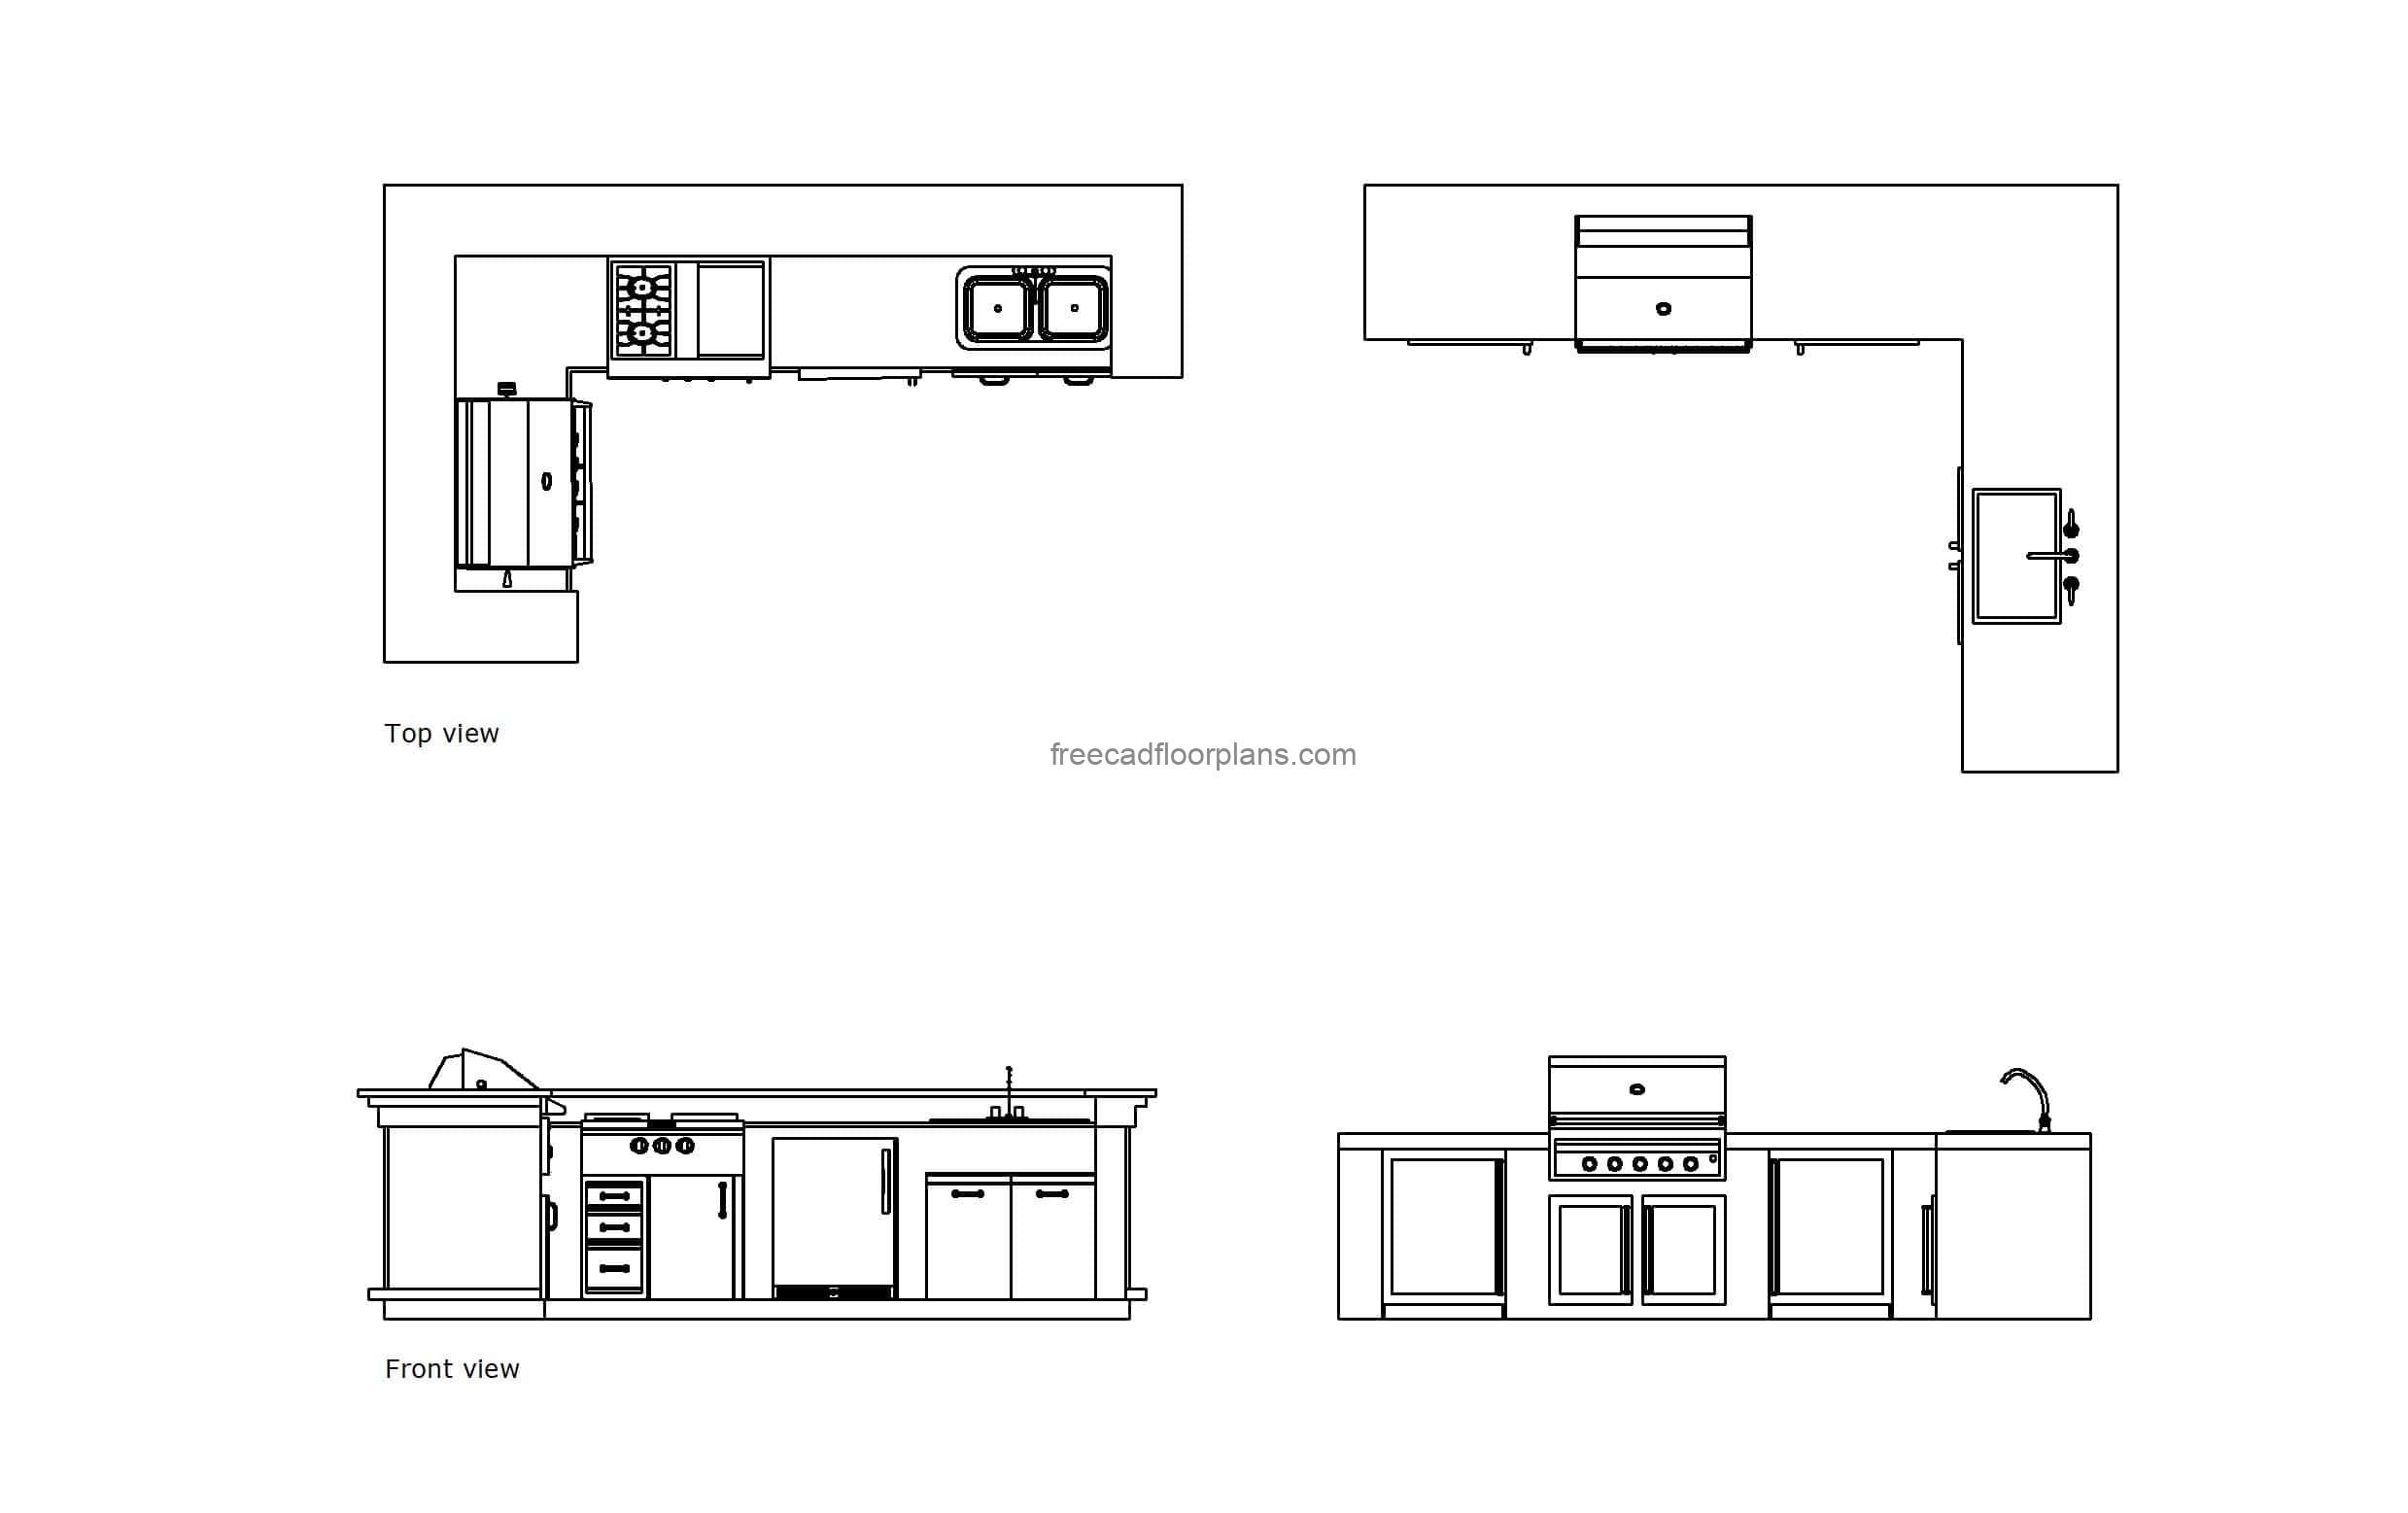 autocad drawing of different outdoor kitchens, plan and elevation 2d views, dwg file free for download